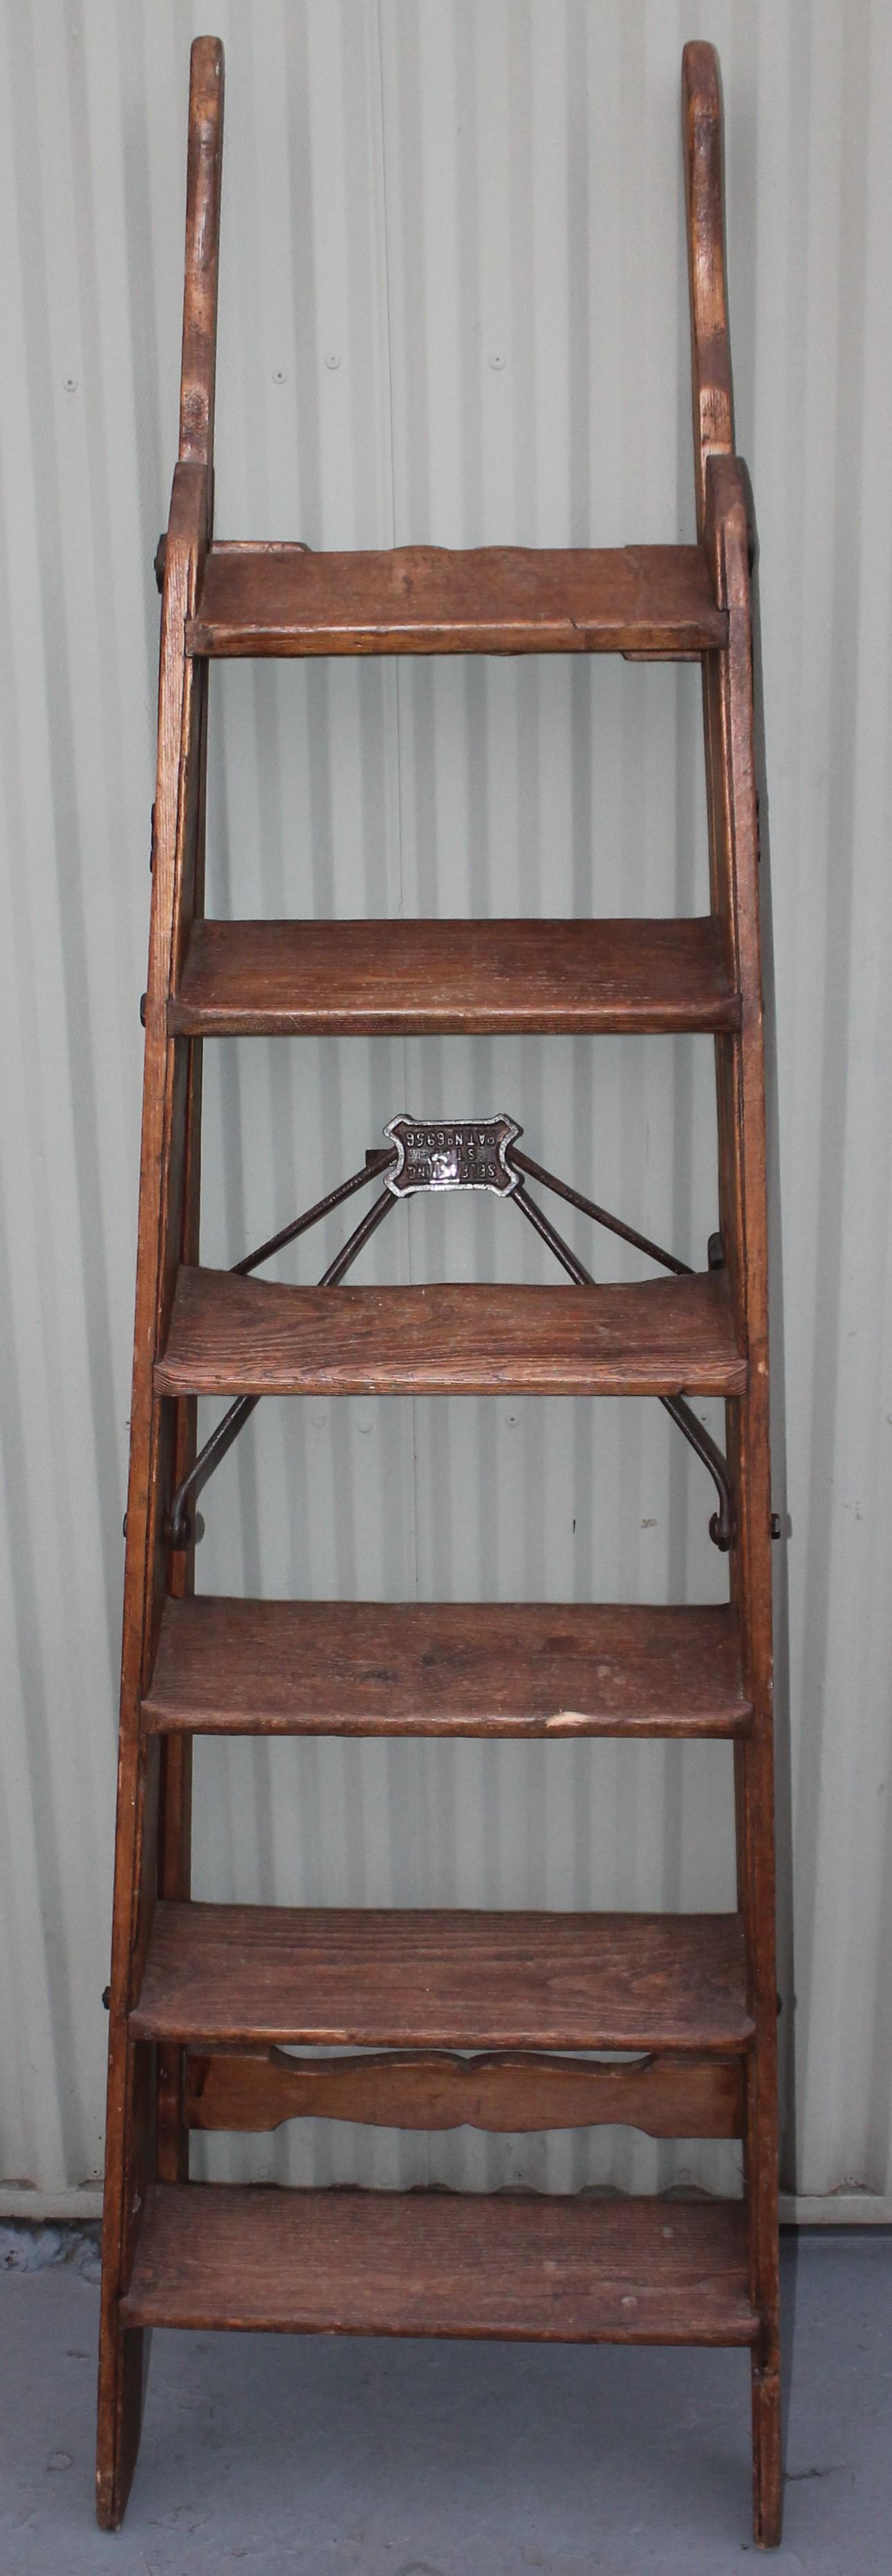 This fine 19th century library folding ladder in fine as found condition. Great for a vintage clothing store or vintage textile store.Fine cut outs and details.
Simplex ladder
Selfacting stop
Patent number 6956.